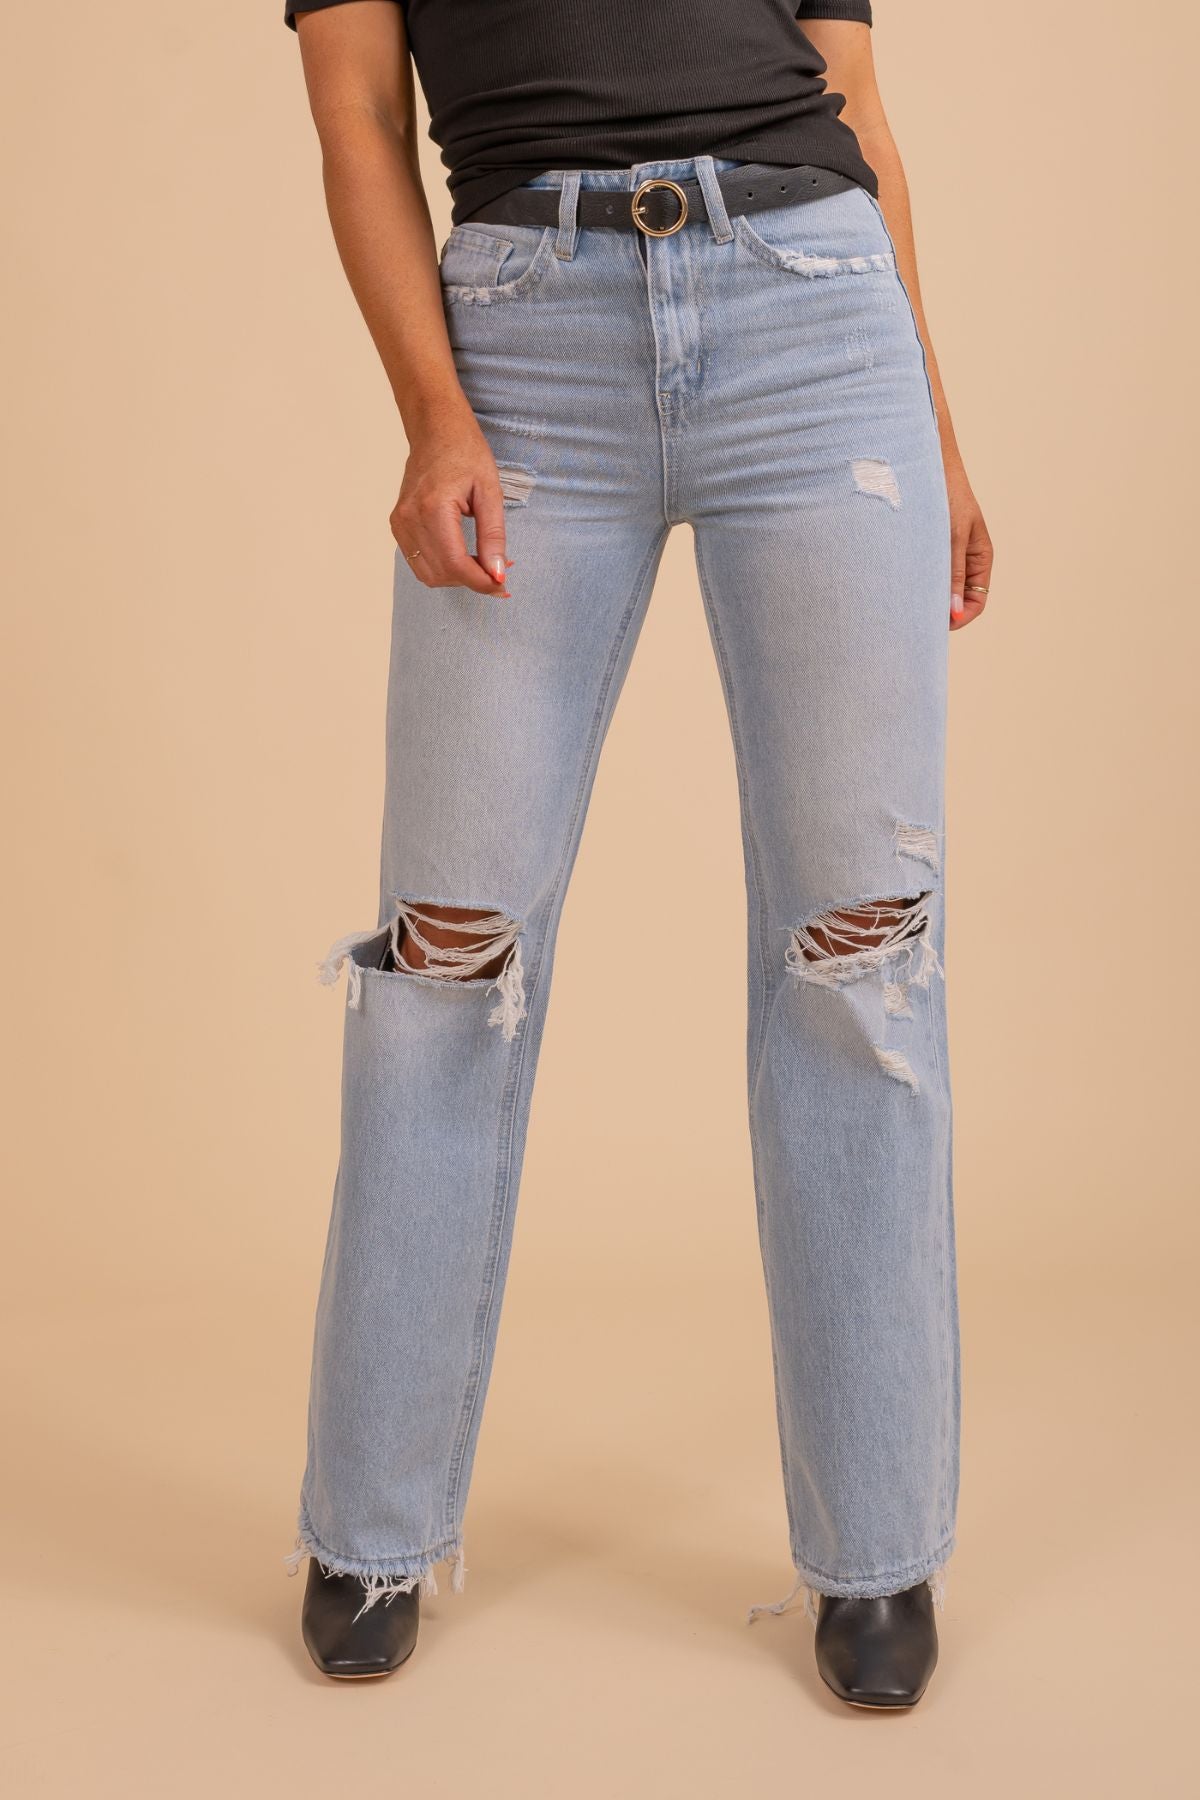 Womens light wash jeans